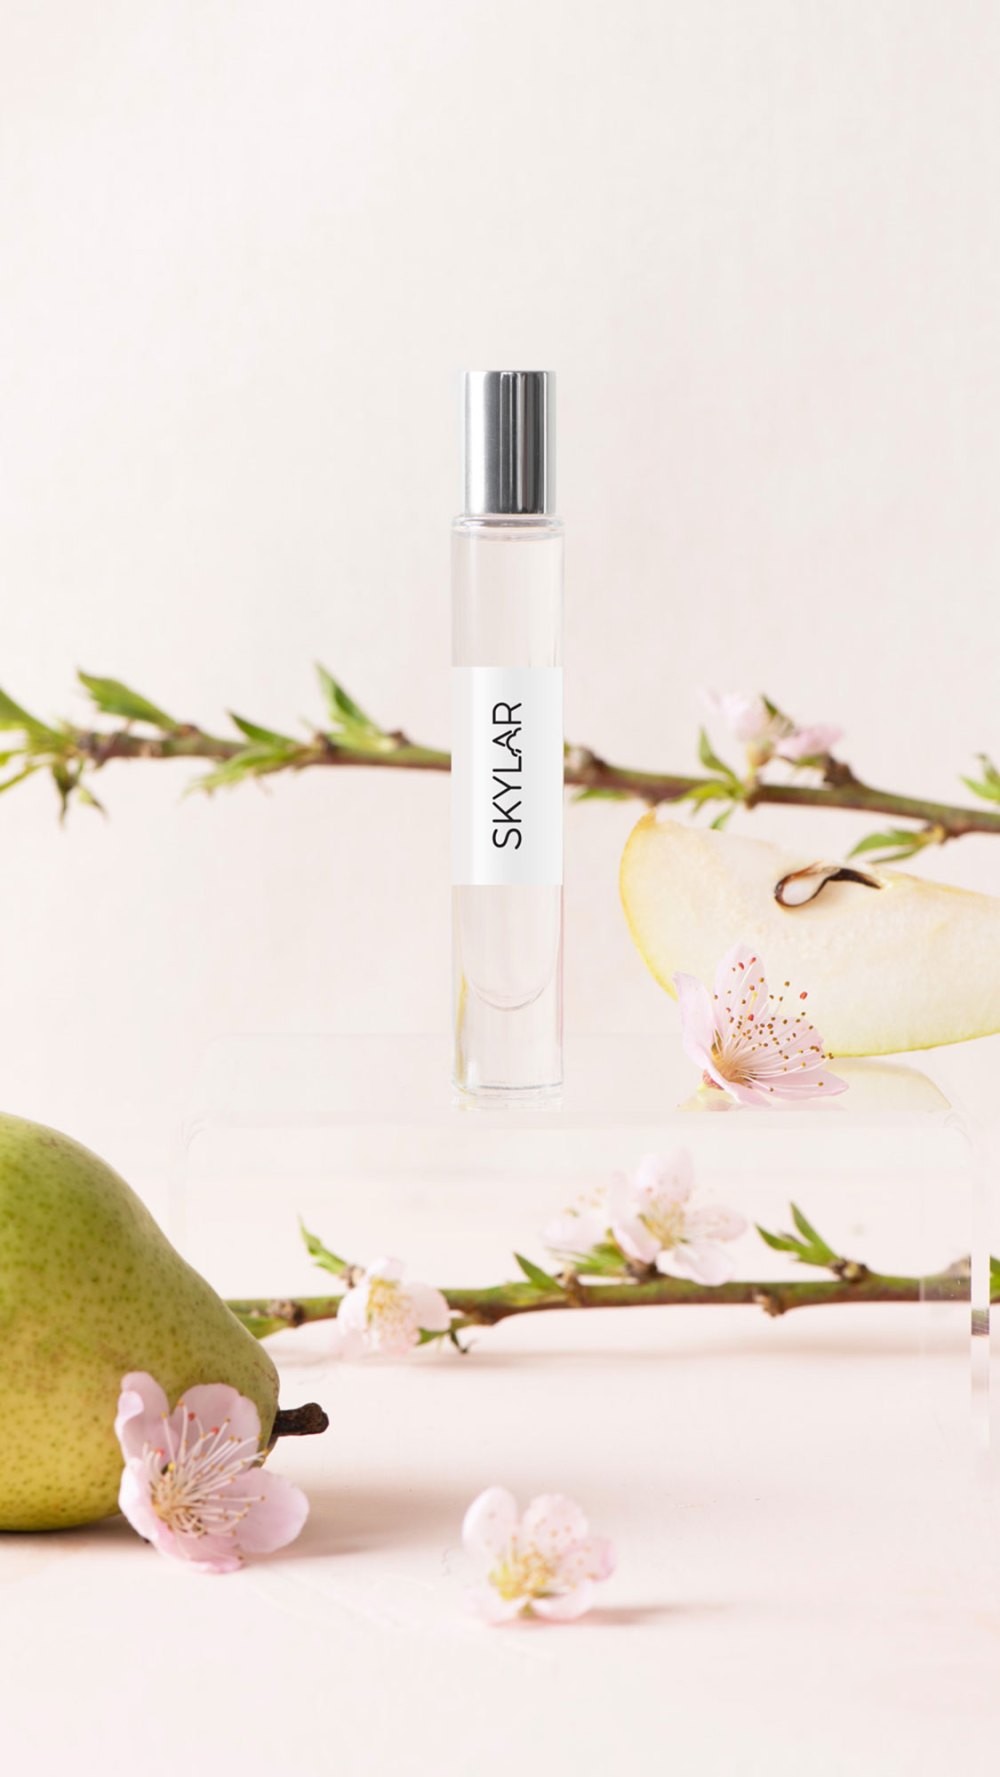 Skylar¹s Monthly Scent Club Will Up Your Fragrance Wardrobe